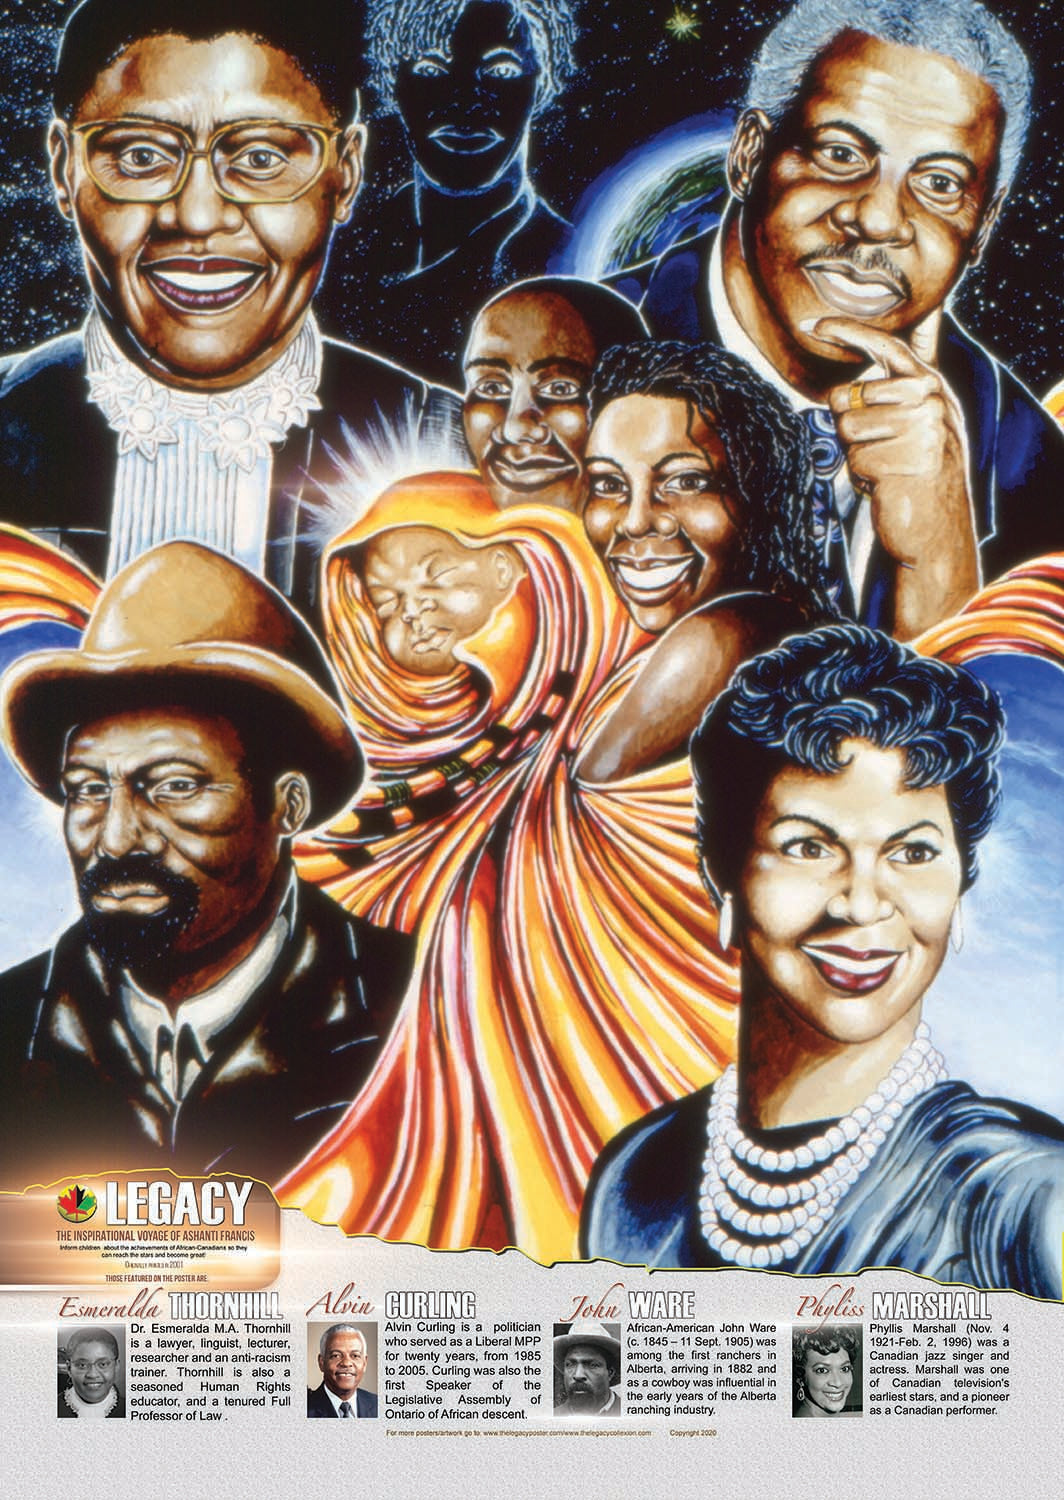 “An educational poster, ideal for Black History Month featuring lawyer Dr. Esmeralda Thornhill, politician Alvin Curling, cowboy John Ware, and entertainer/singer Phyliss Marshall created by African-Canadian artist Robert Small.”